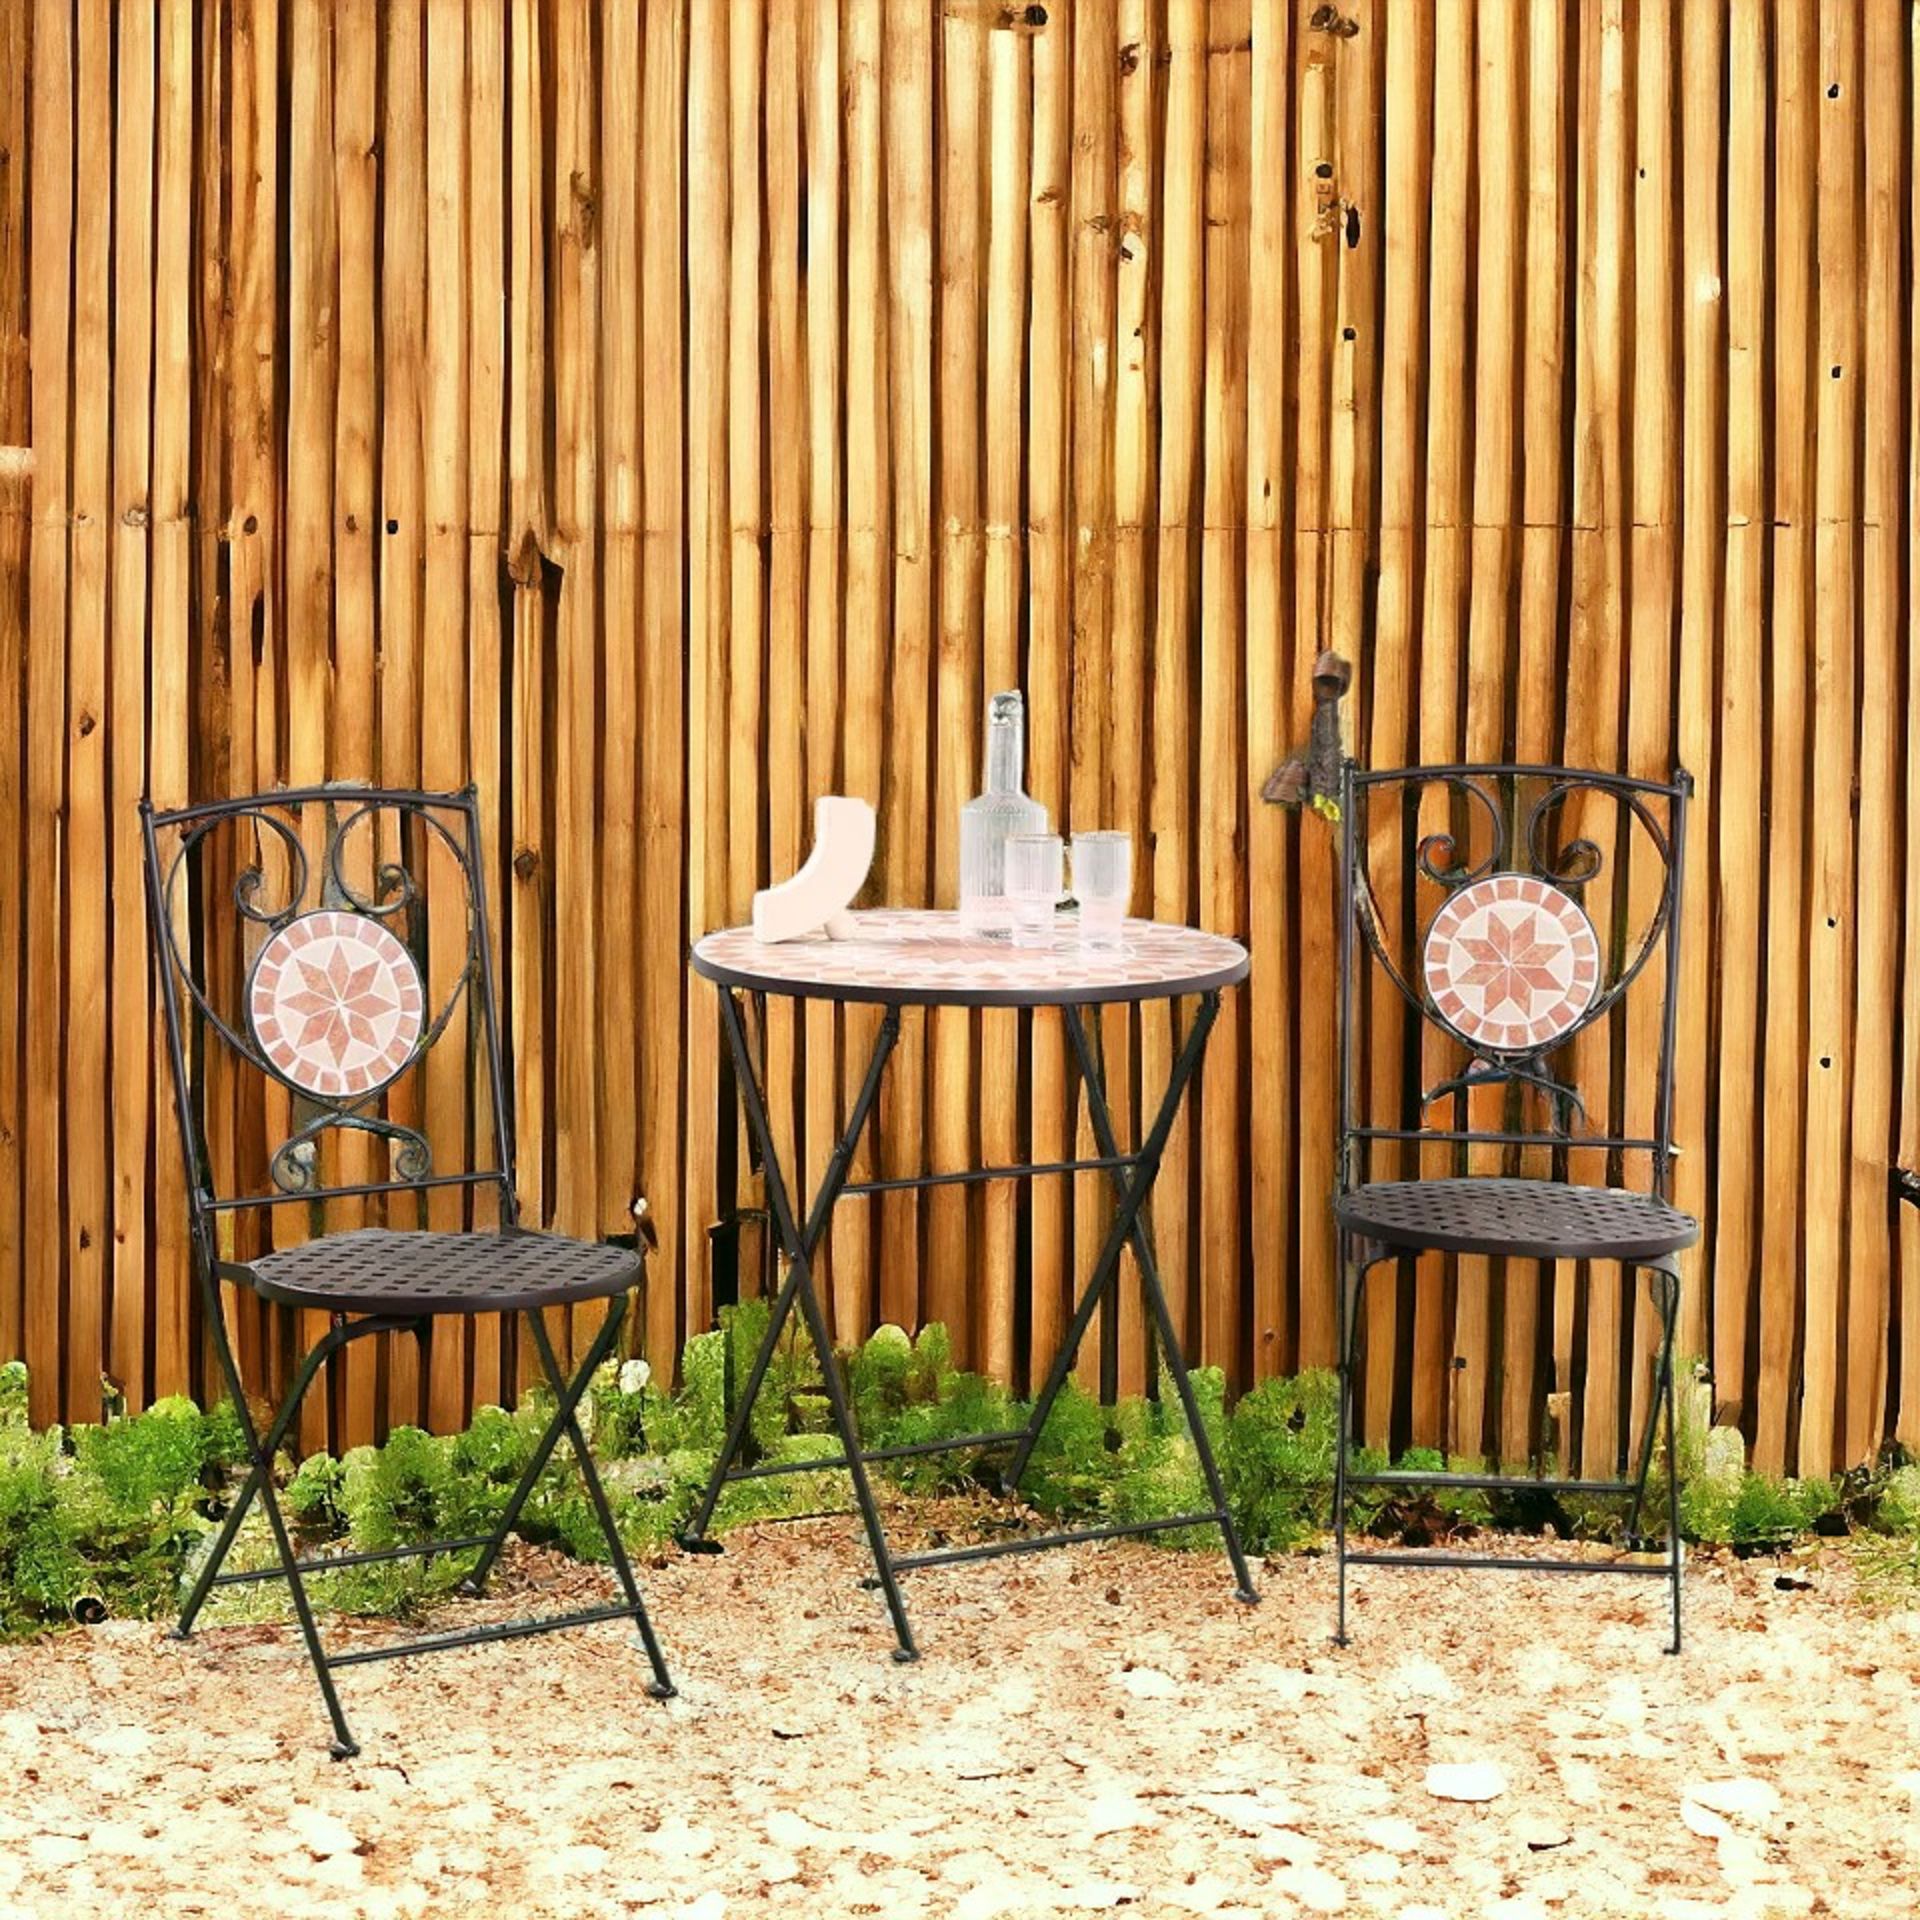 FREE DELIVERY- BRAND NEW 3-PIECE OUTDOOR BISTRO SET W/ MOSAIC ROUND TABLE AND 2 ARMLESS CHAIRS - Image 2 of 2